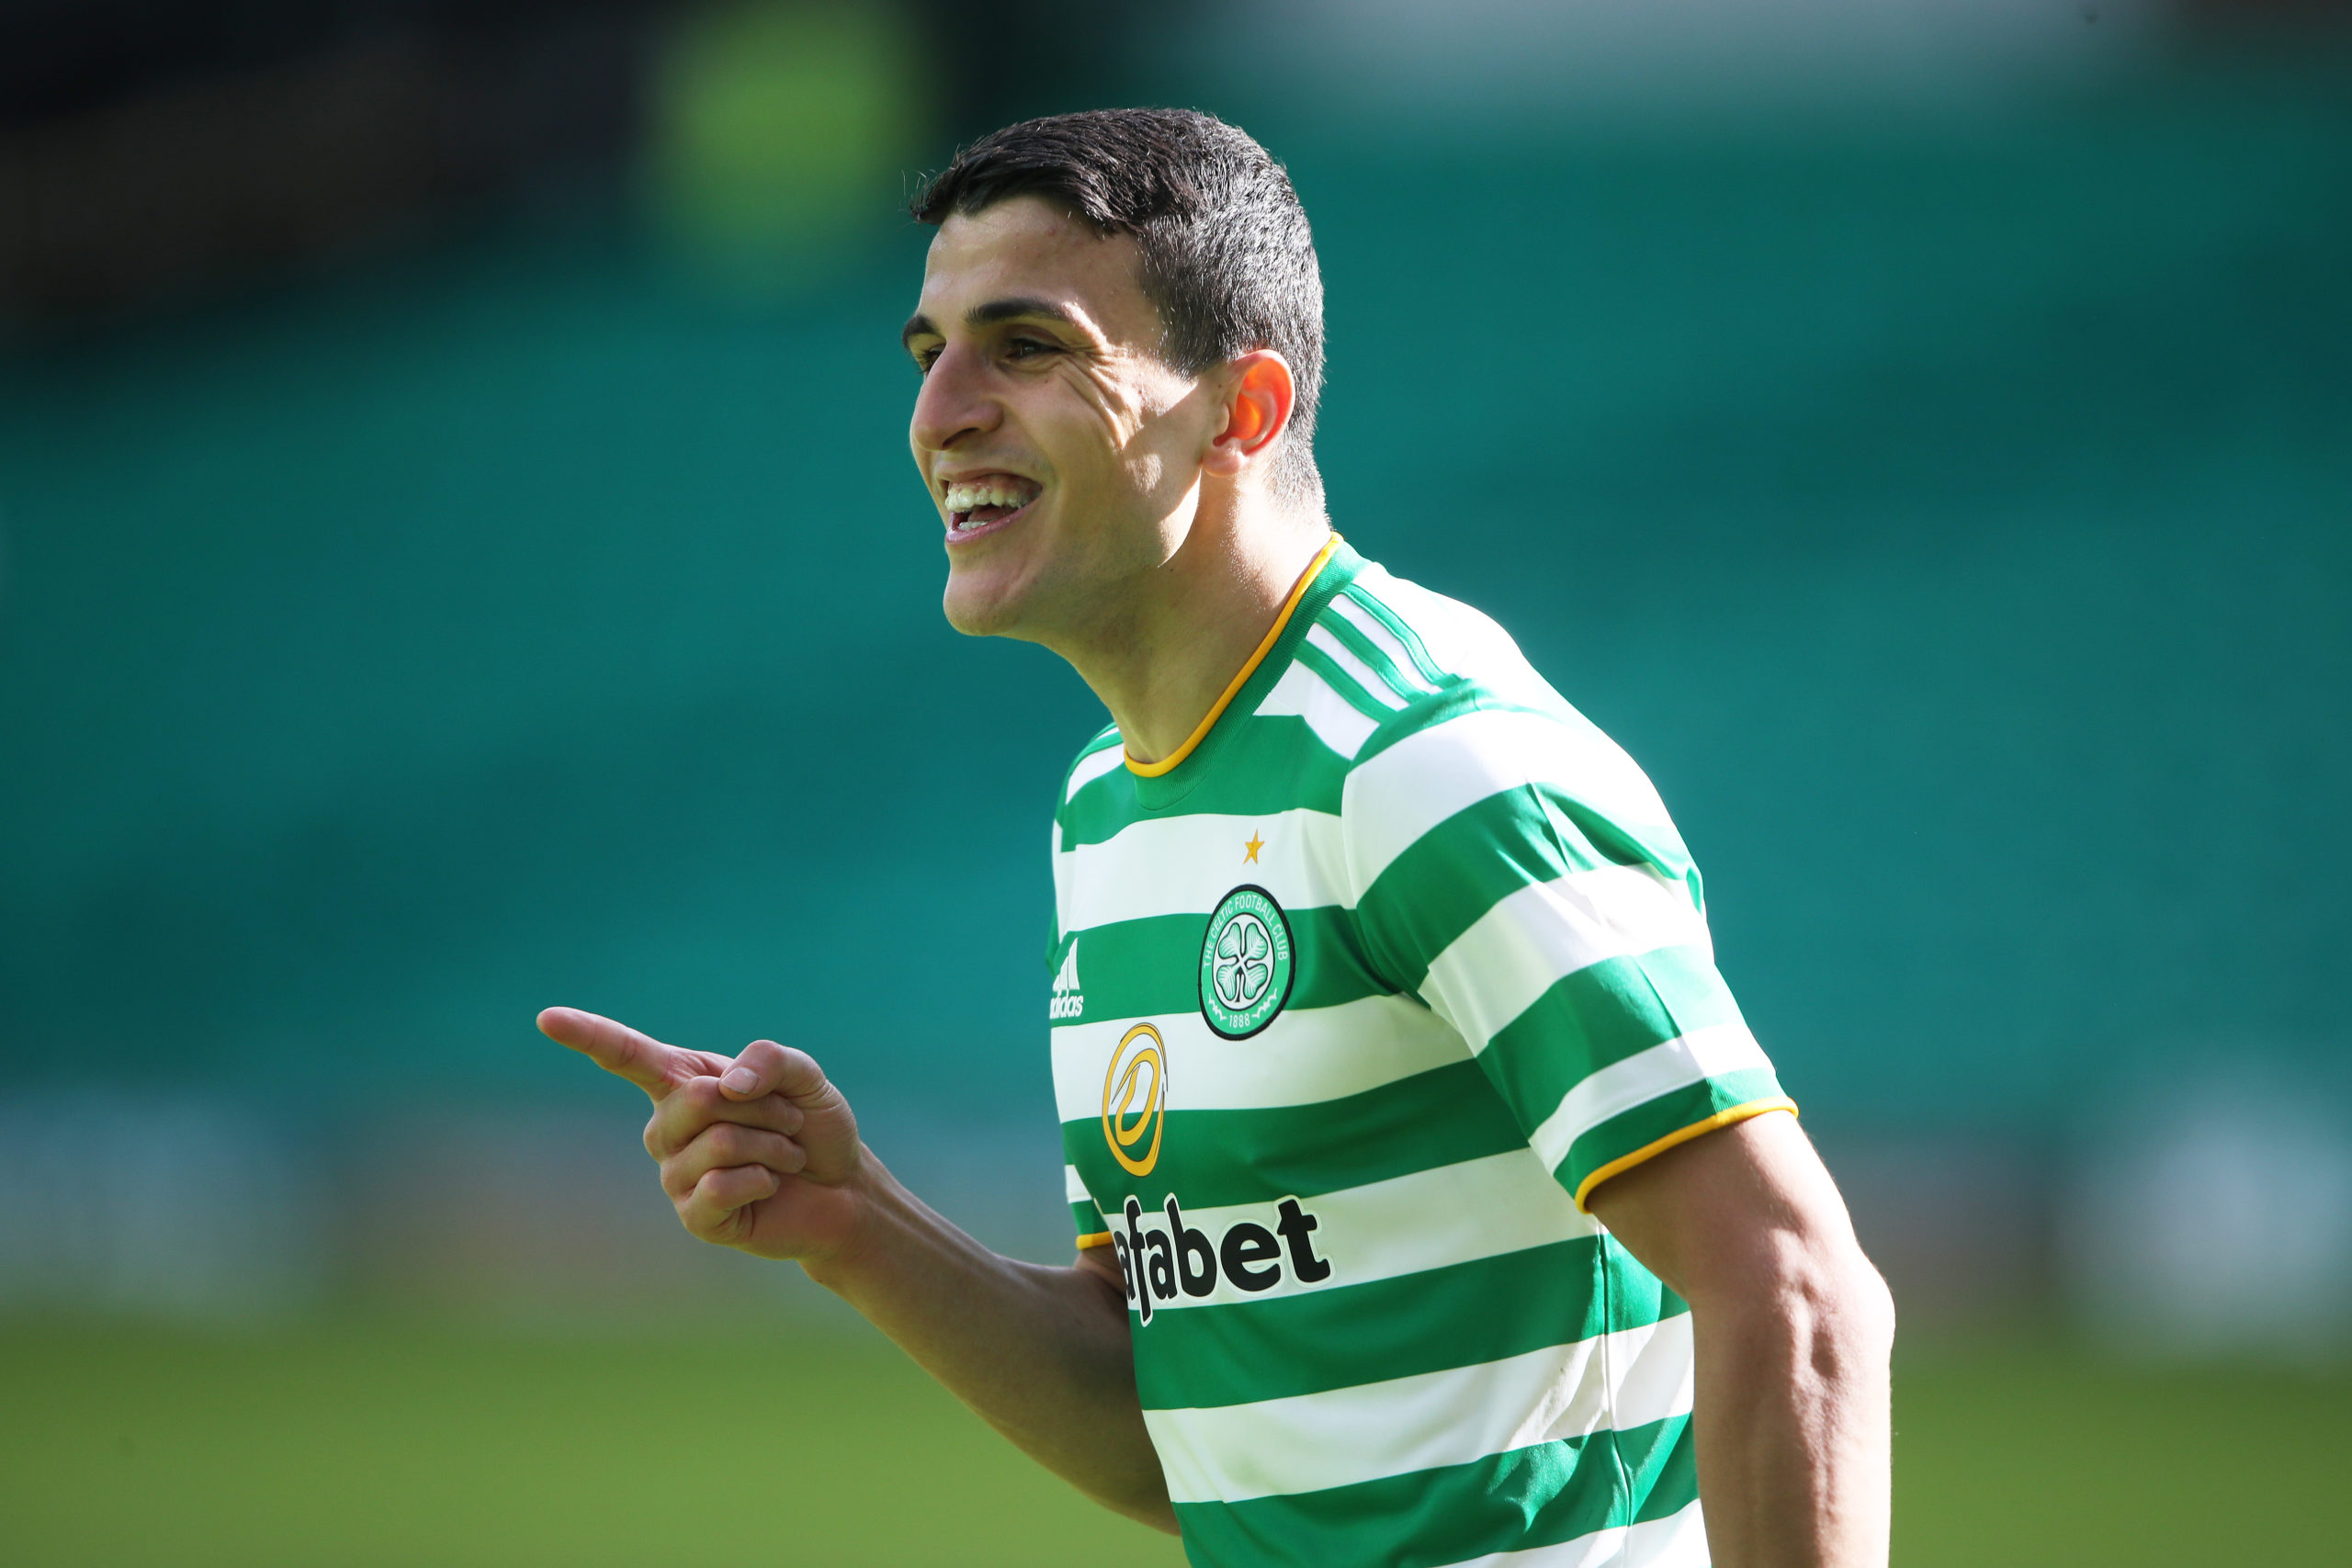 Southampton want to give Elyounoussi another chance after Celtic loan; Bundesliga clubs interested